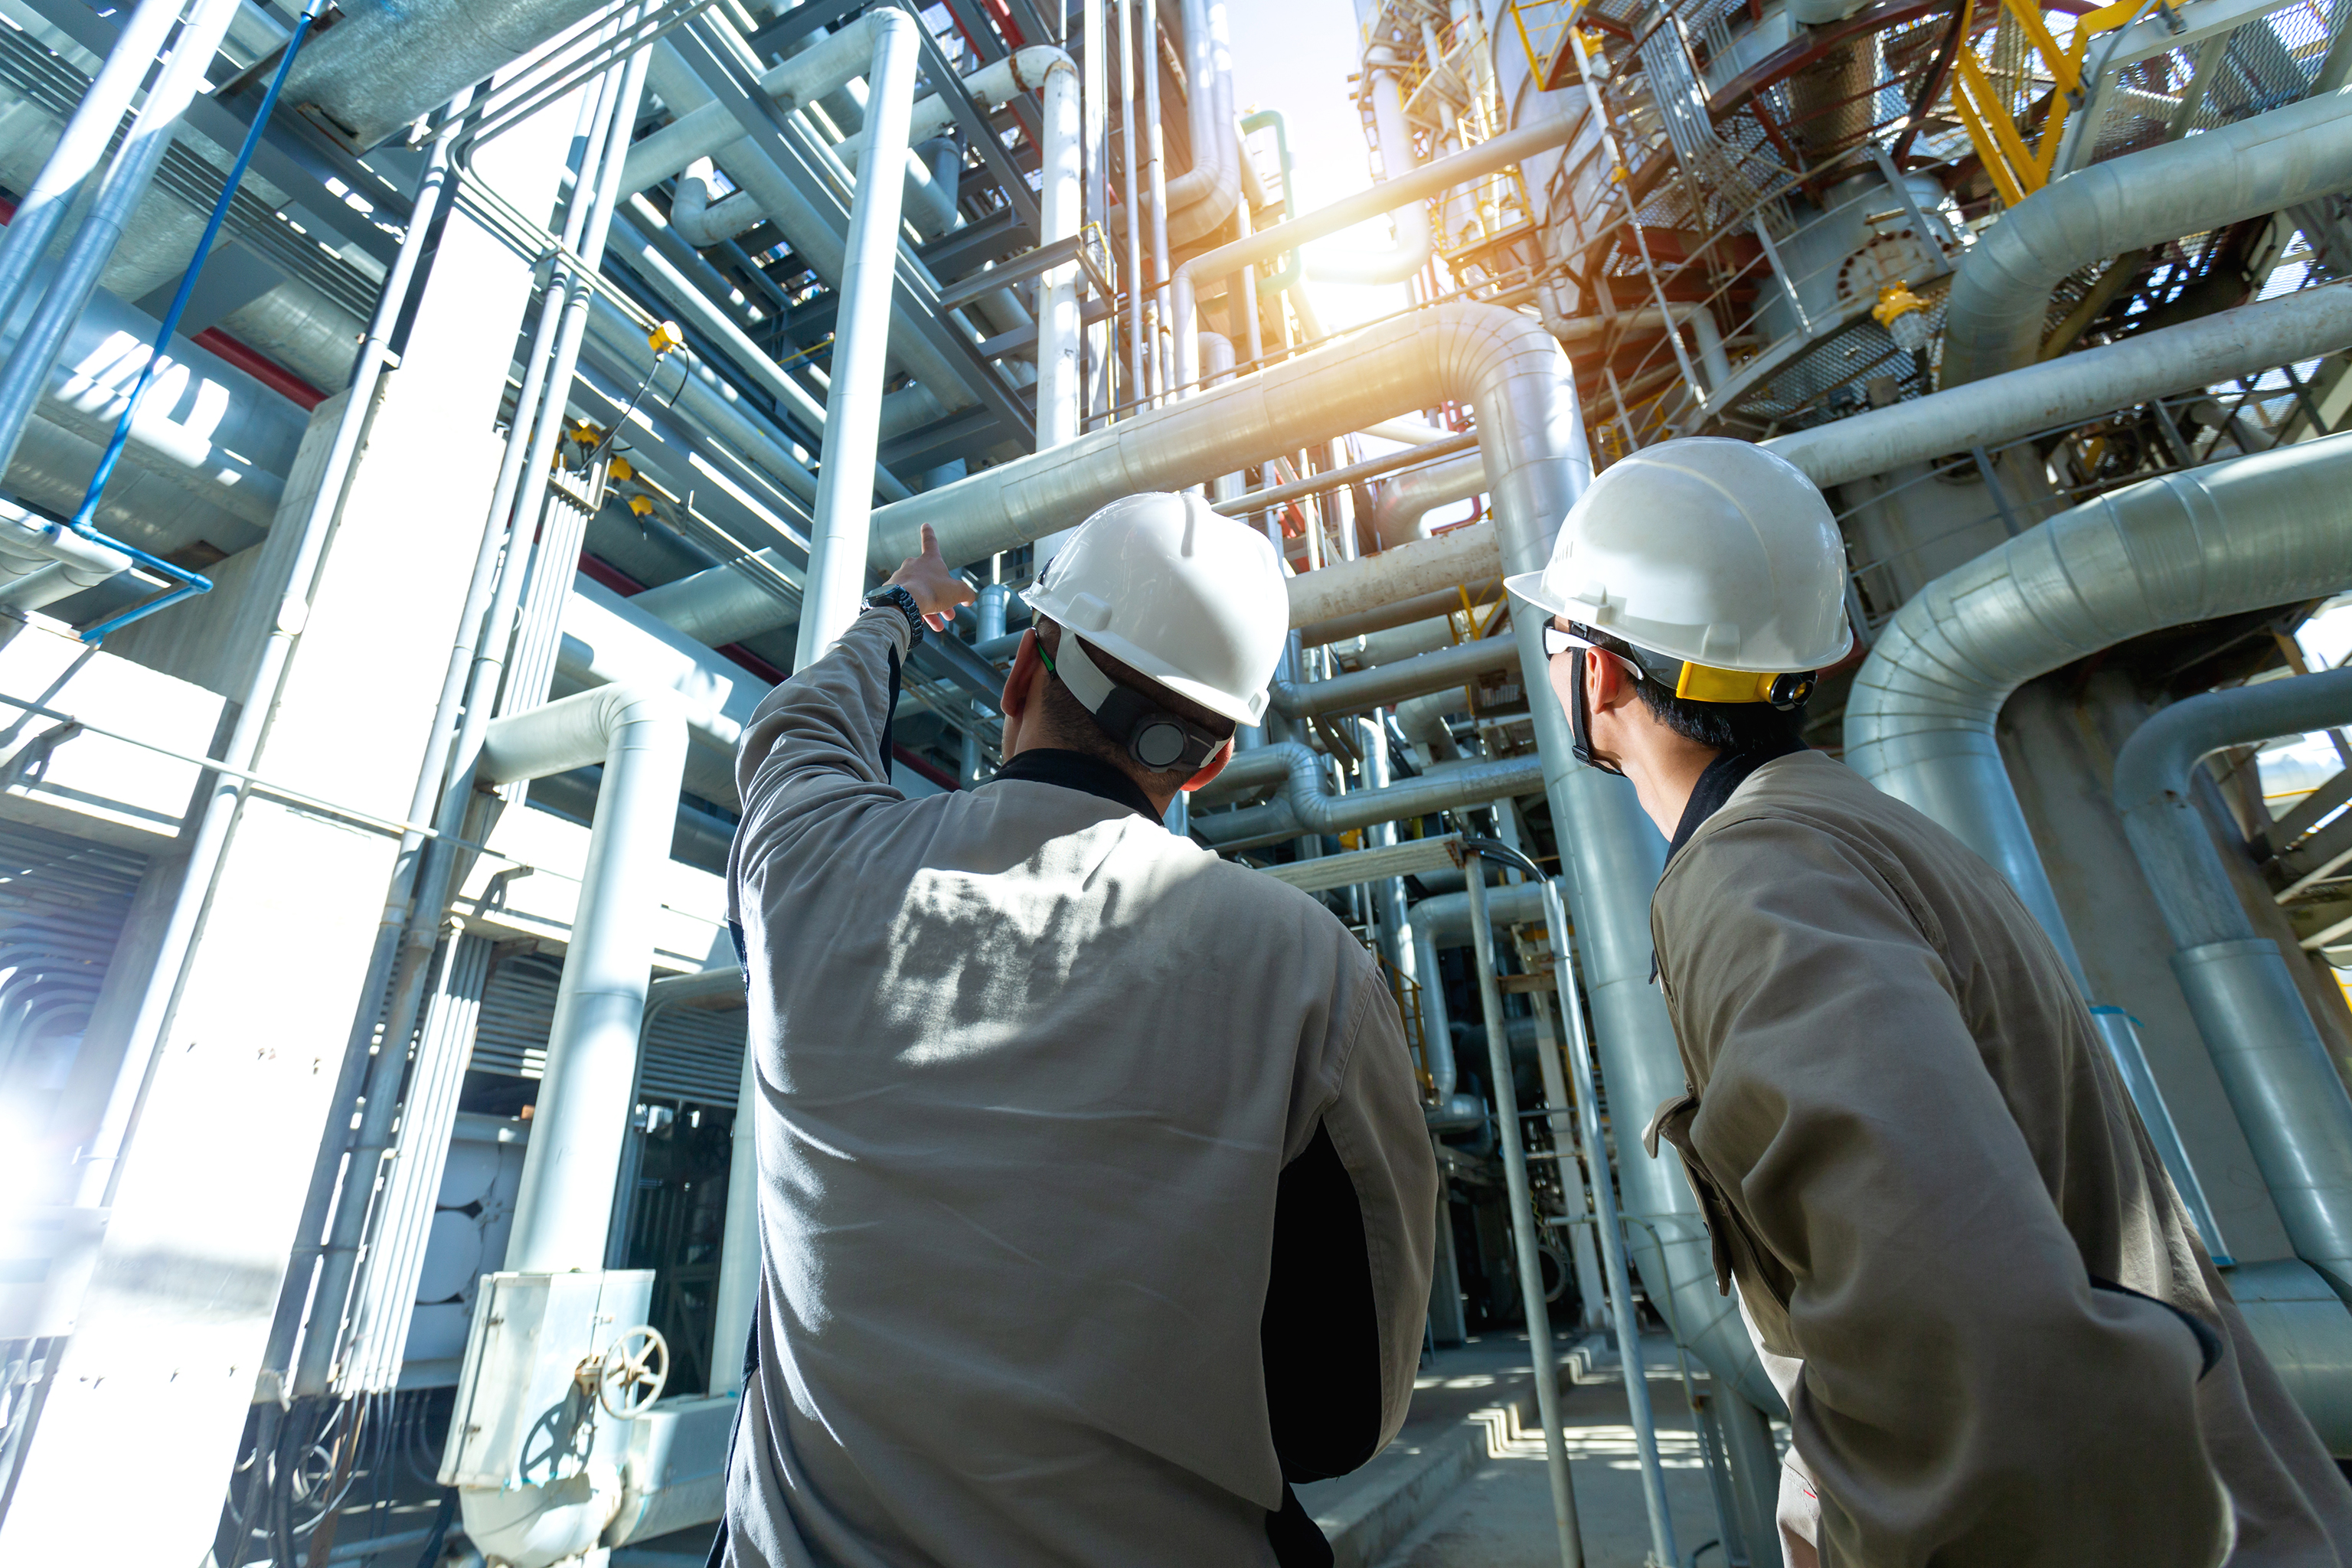 High-pressure piping inspections